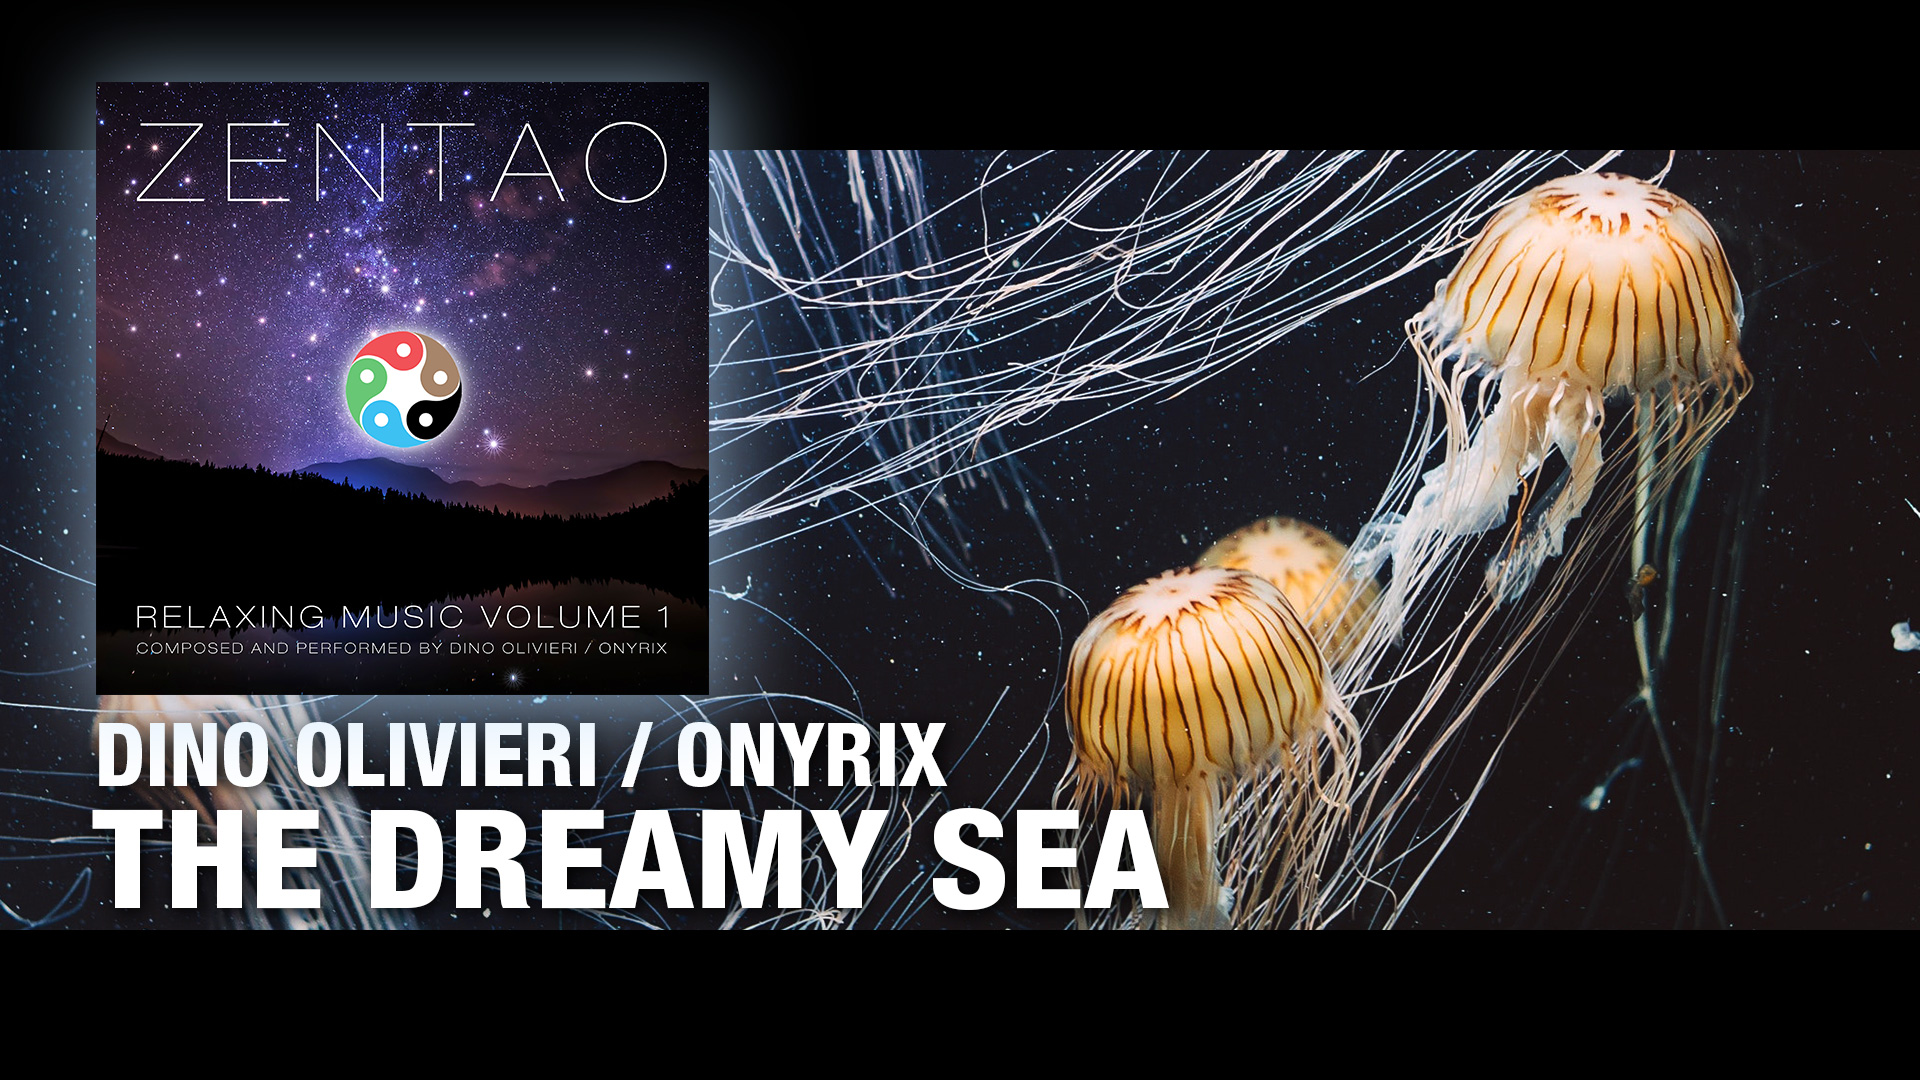 The Dreamy Sea - ZENTAO Relaxing Music Volume 1 by Dino Olivieri